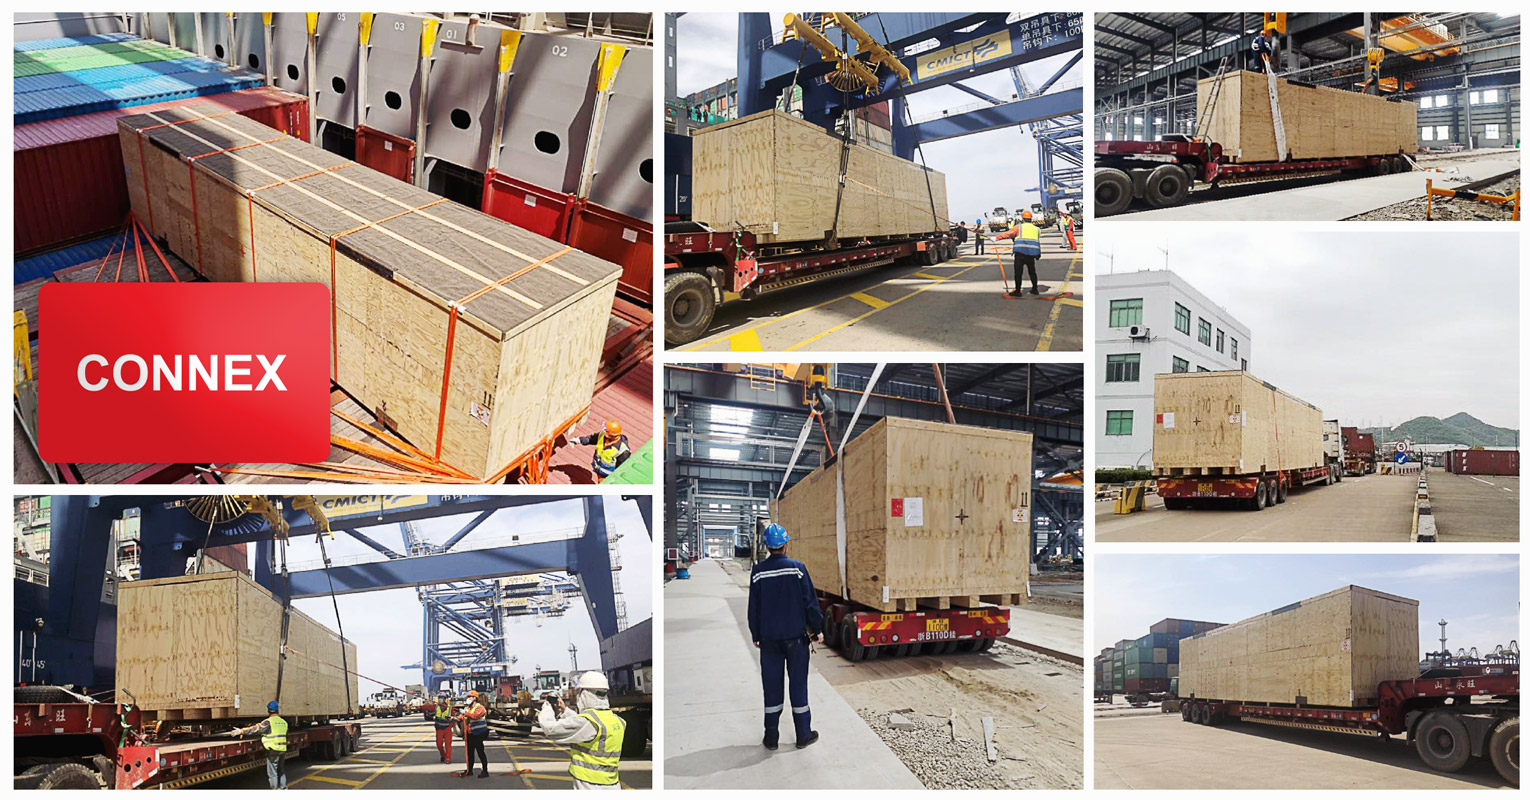 Ningbo Connexion Unloaded a 65 tons of Machinery from Container Ship to Transport Receiver